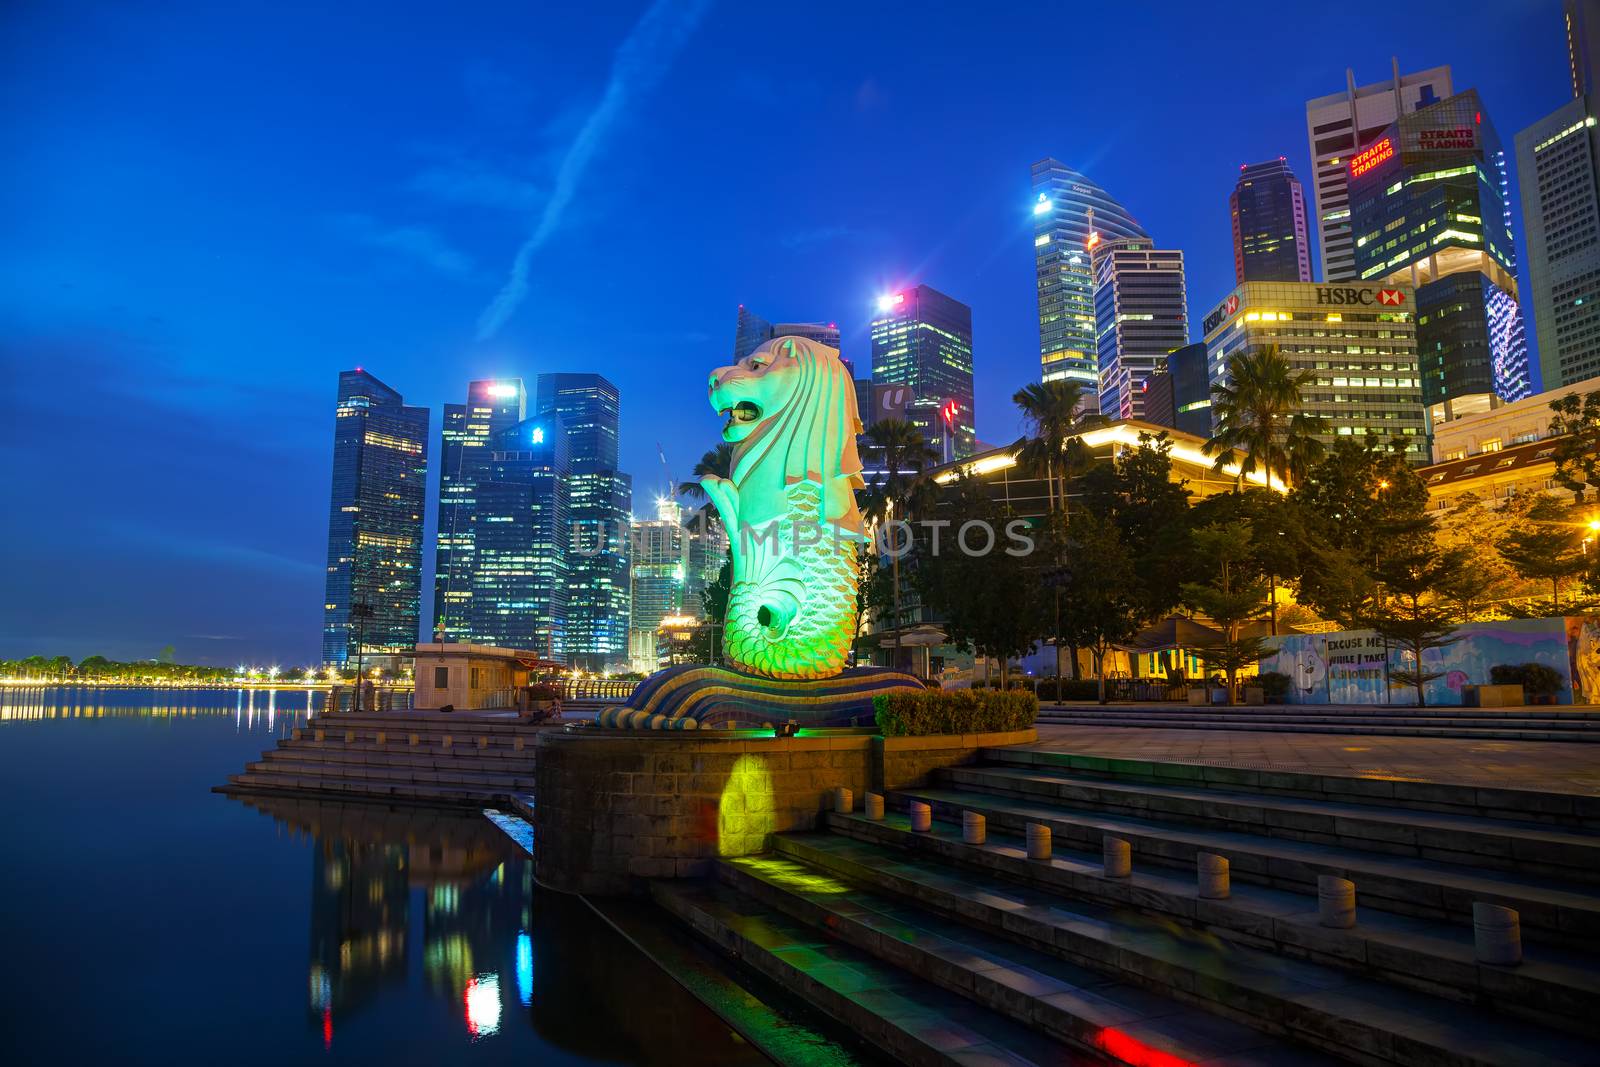 Overview of the marina bay with the Merlion in Singapore by AndreyKr